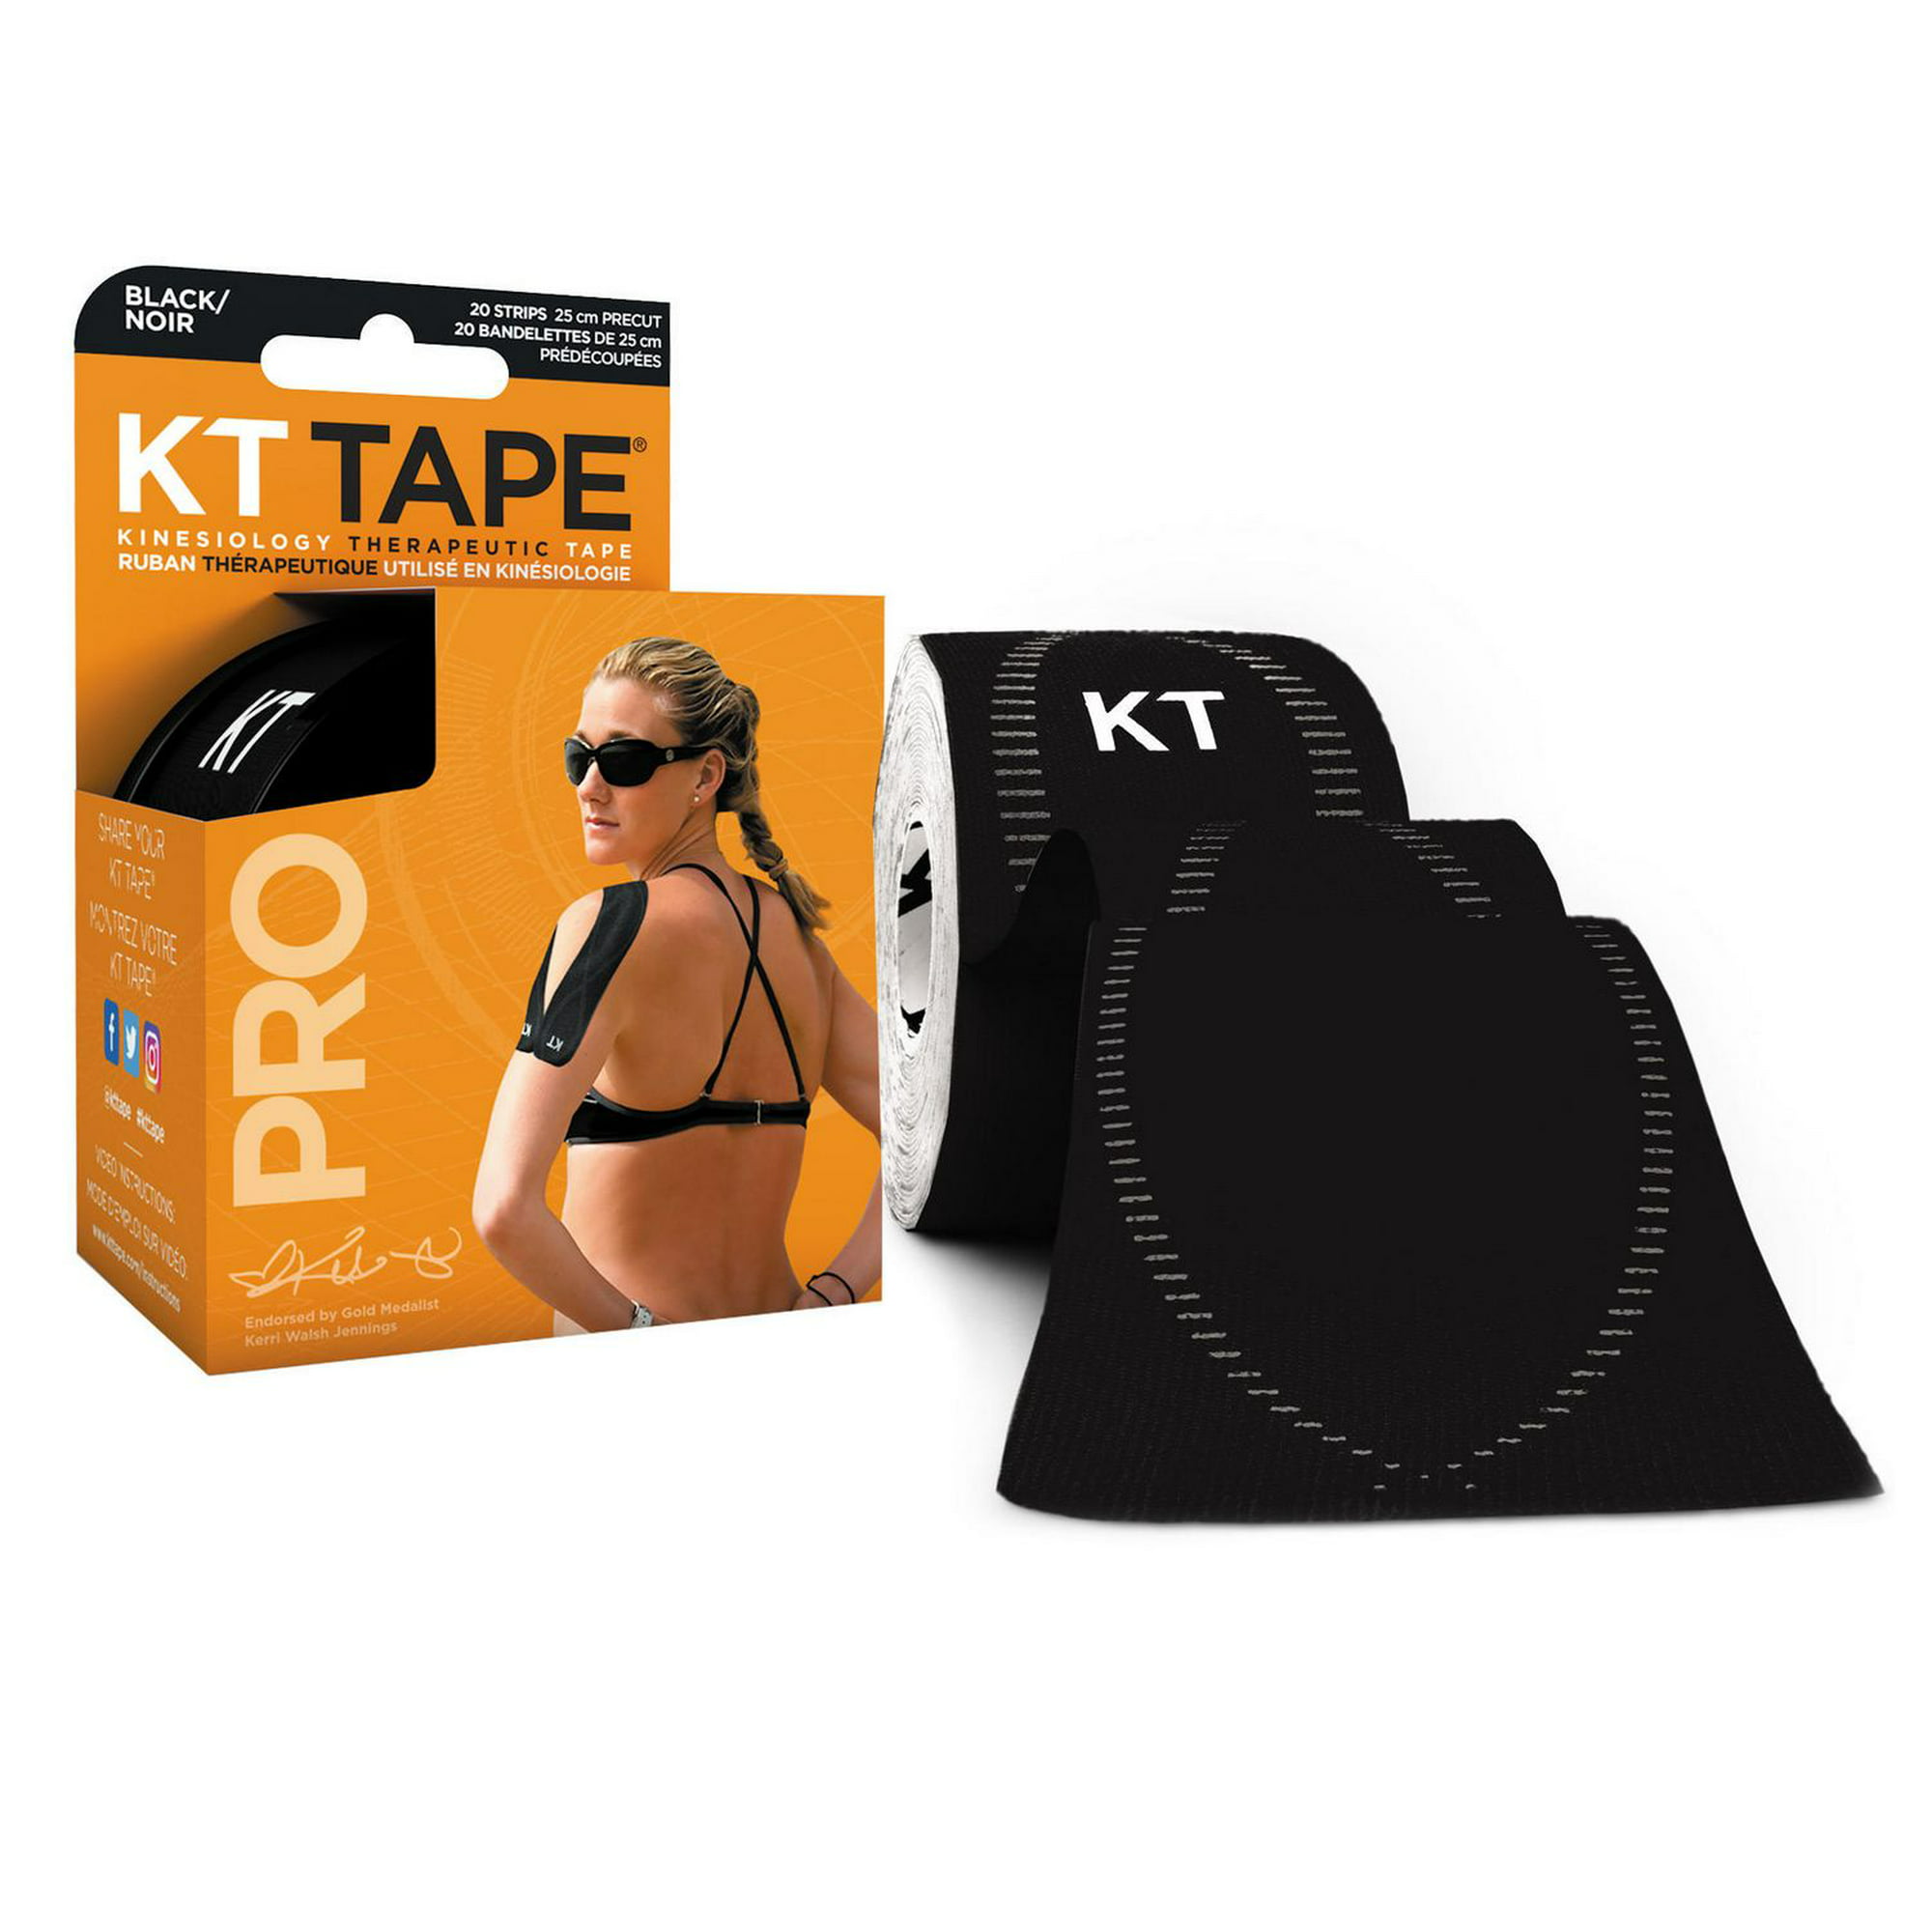 KT TAPE PRO Black Therapeutic Kinesiology Sports Tape, 20 Strips 